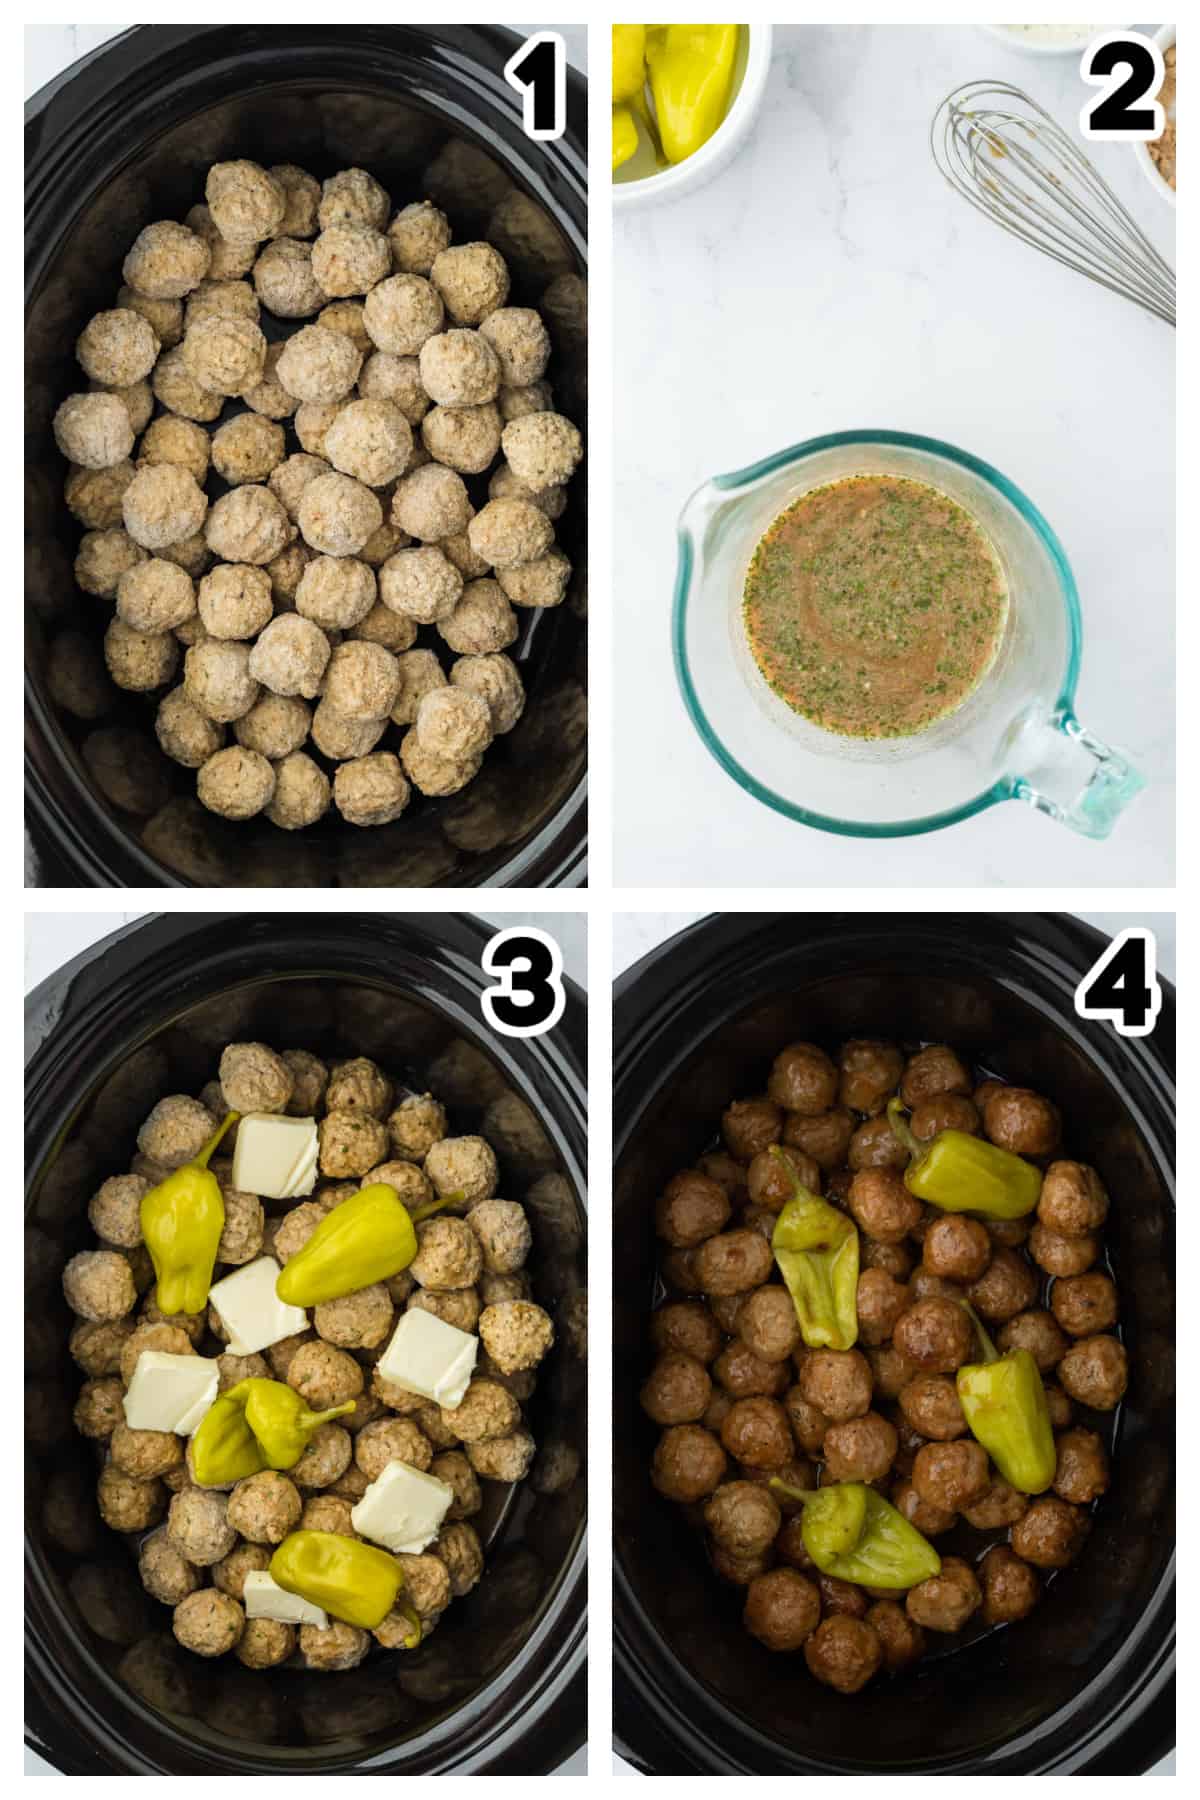 Collage showing how to make crockpot meatball recipe.